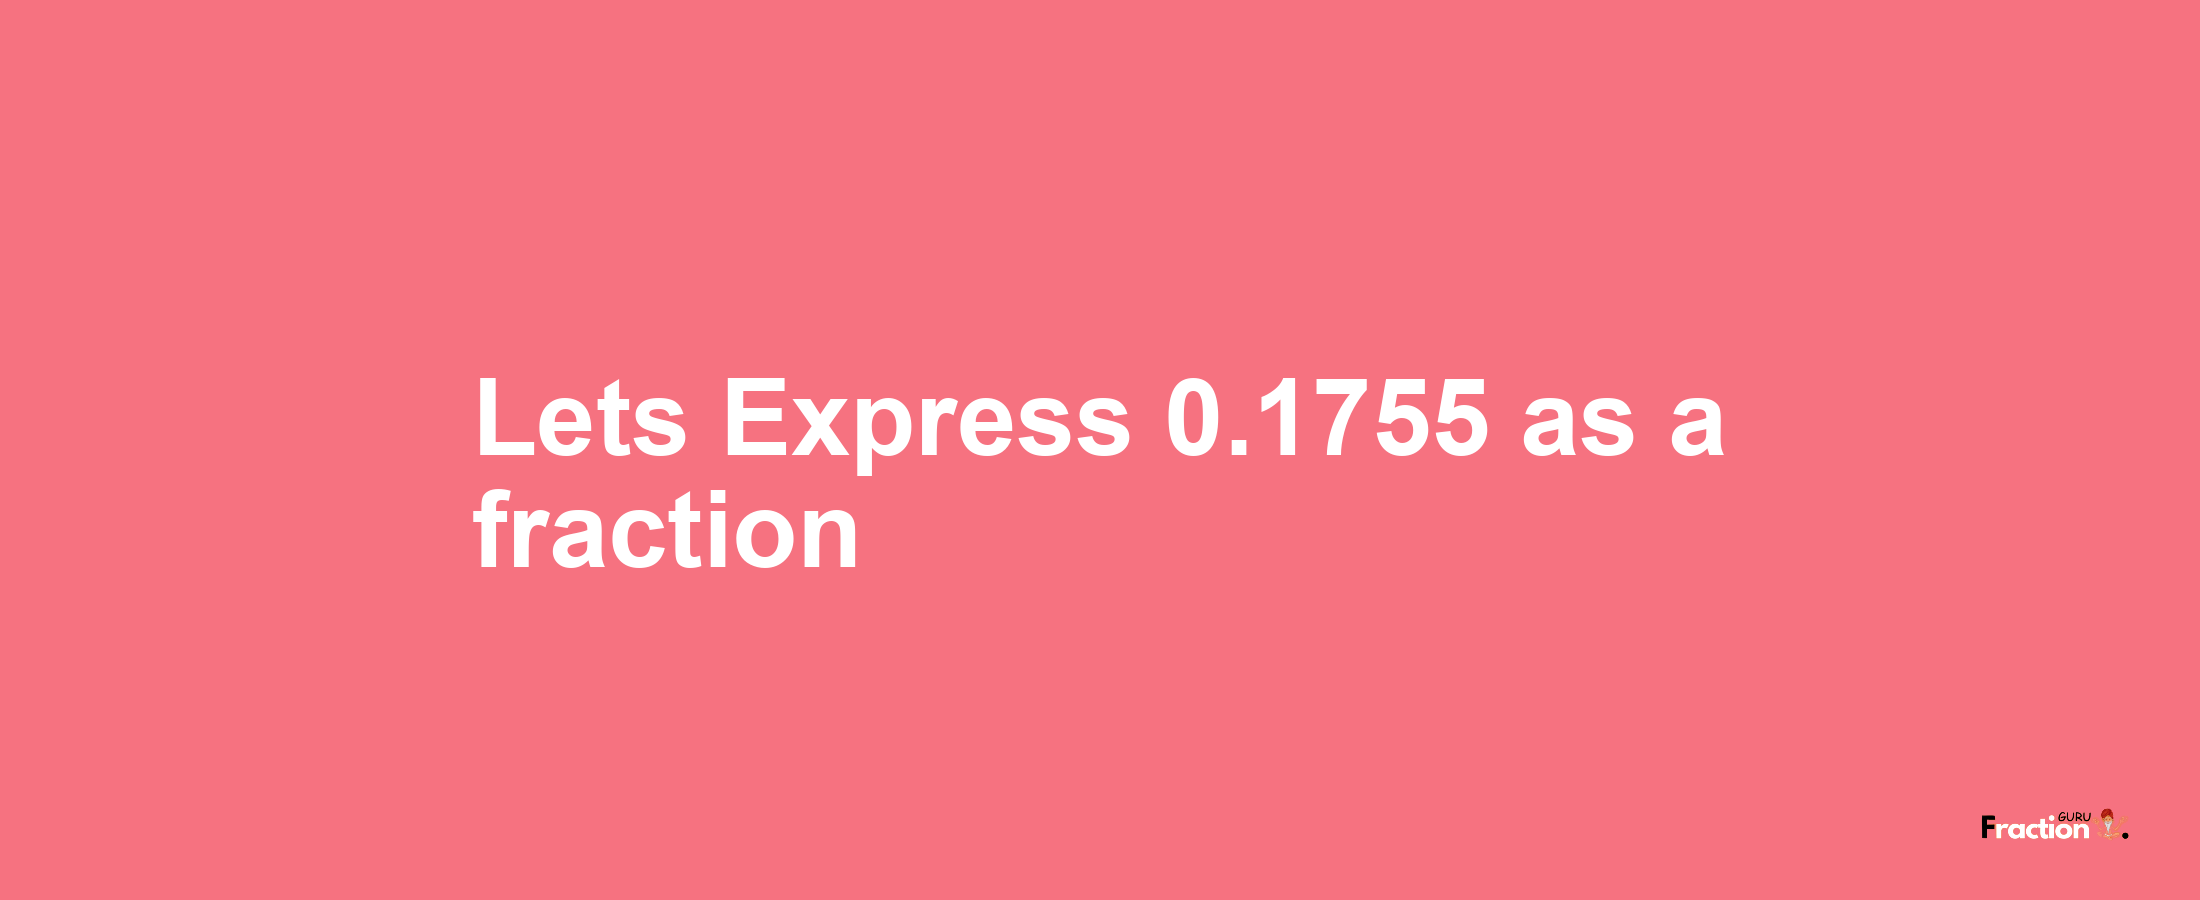 Lets Express 0.1755 as afraction